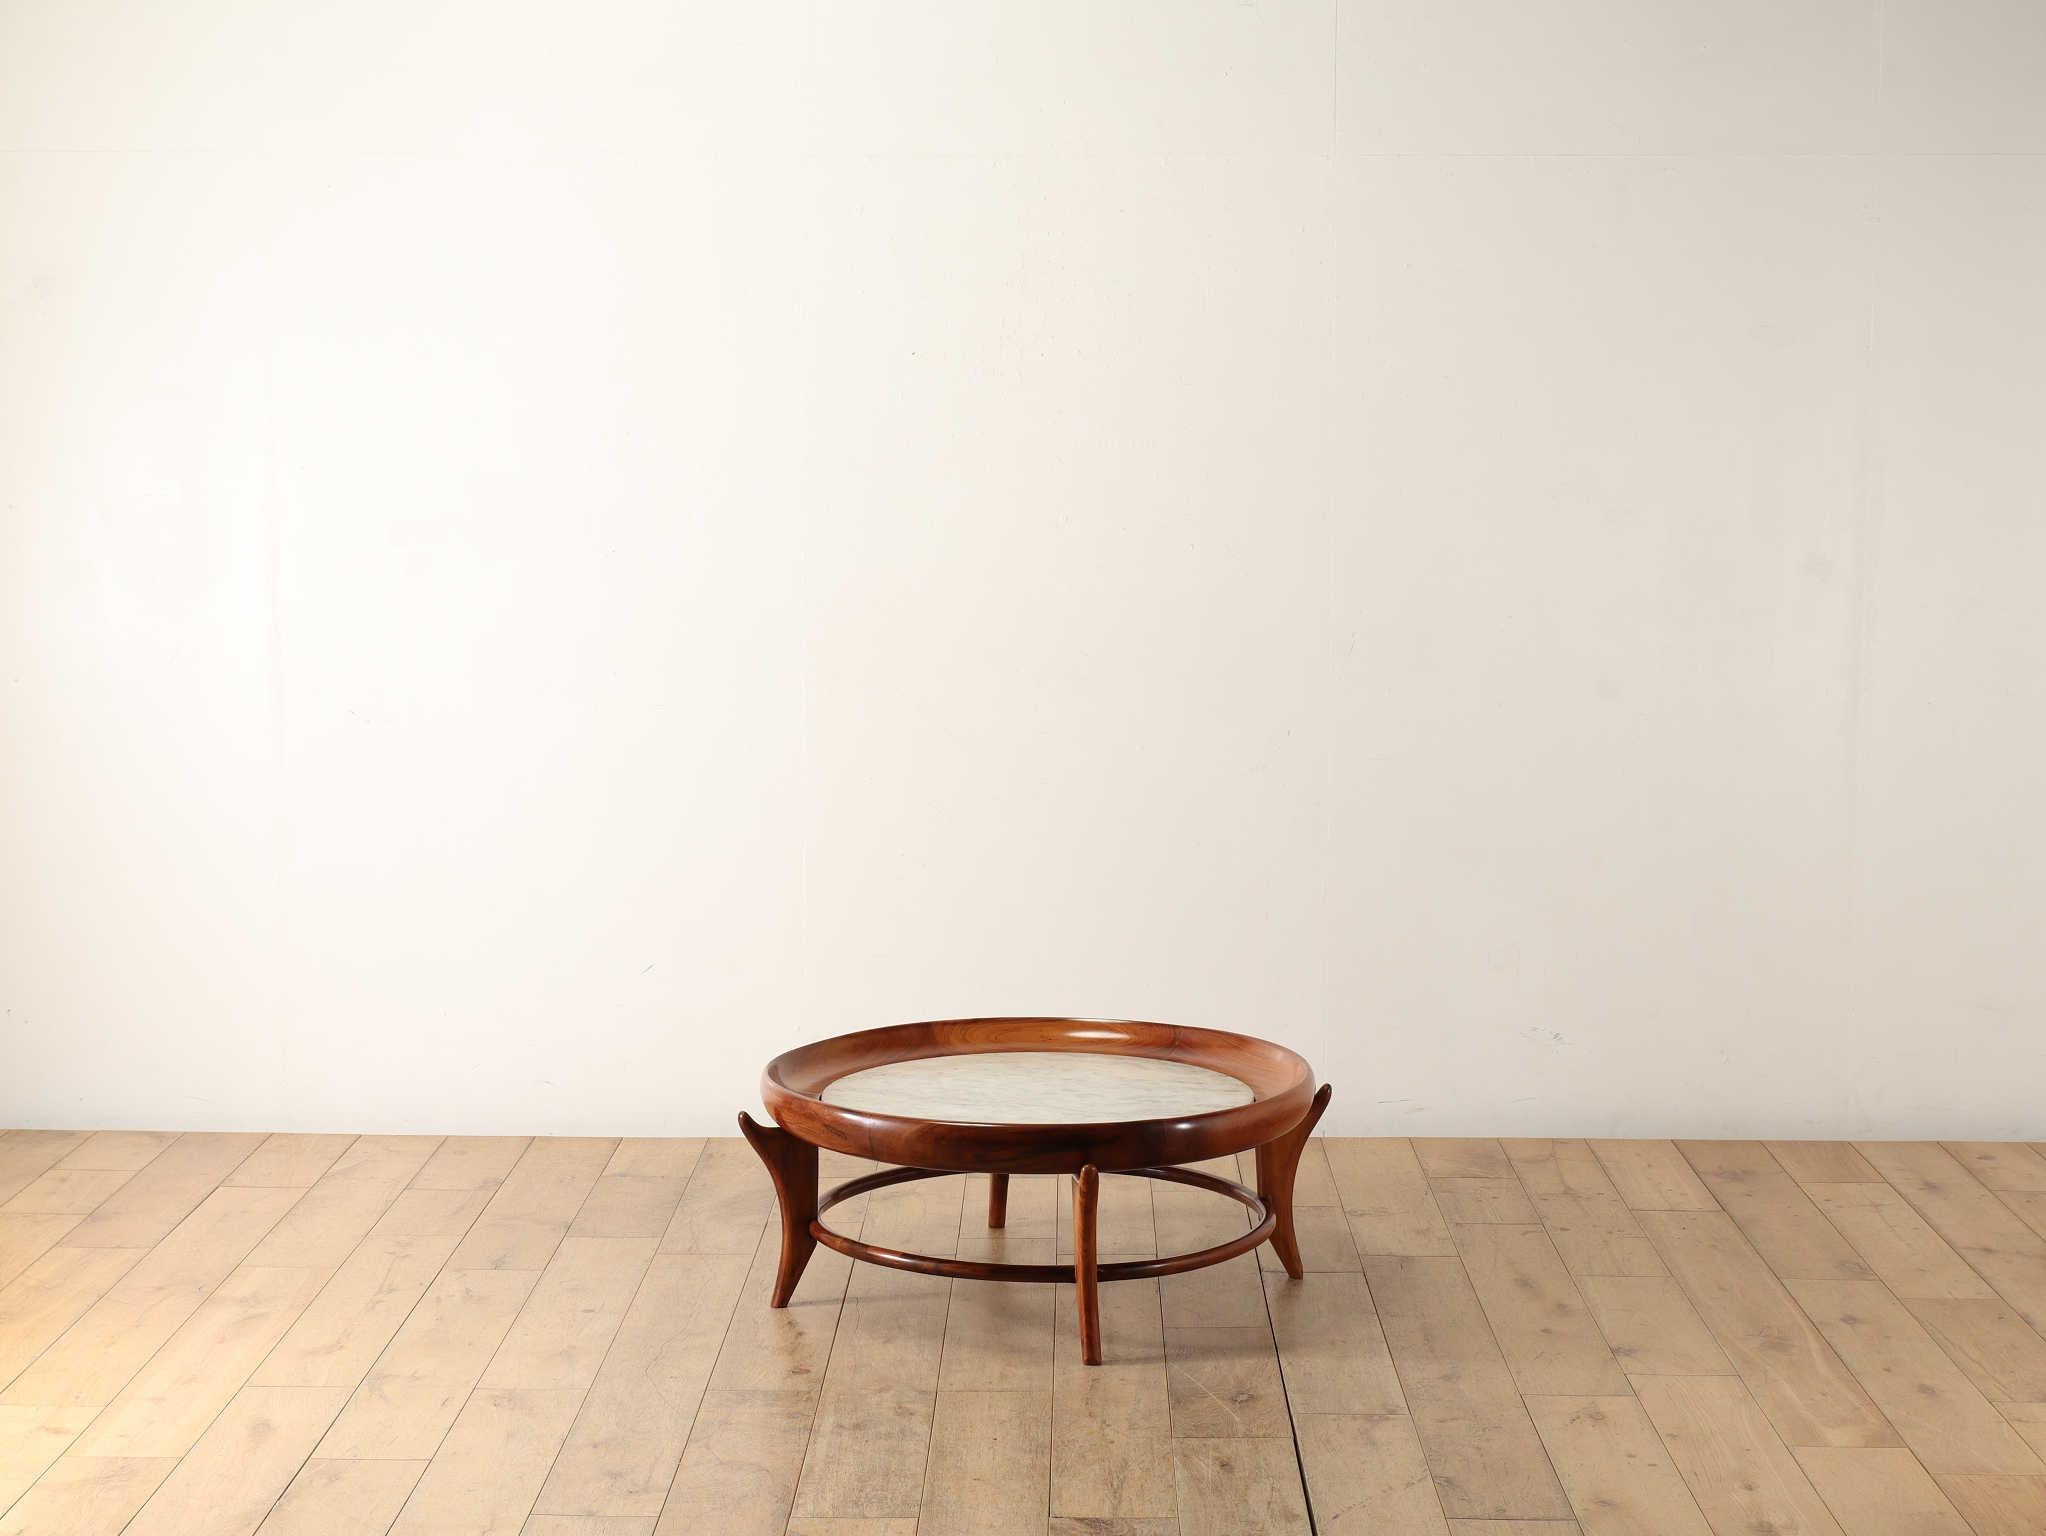 This round coffee table was made in Brazil and is made of Caviuna wood with white marble. Caviuna wood is famous as a material used extensively in furniture making during this Brazilian mid-century period, and is said to be shiny, hard and resistant